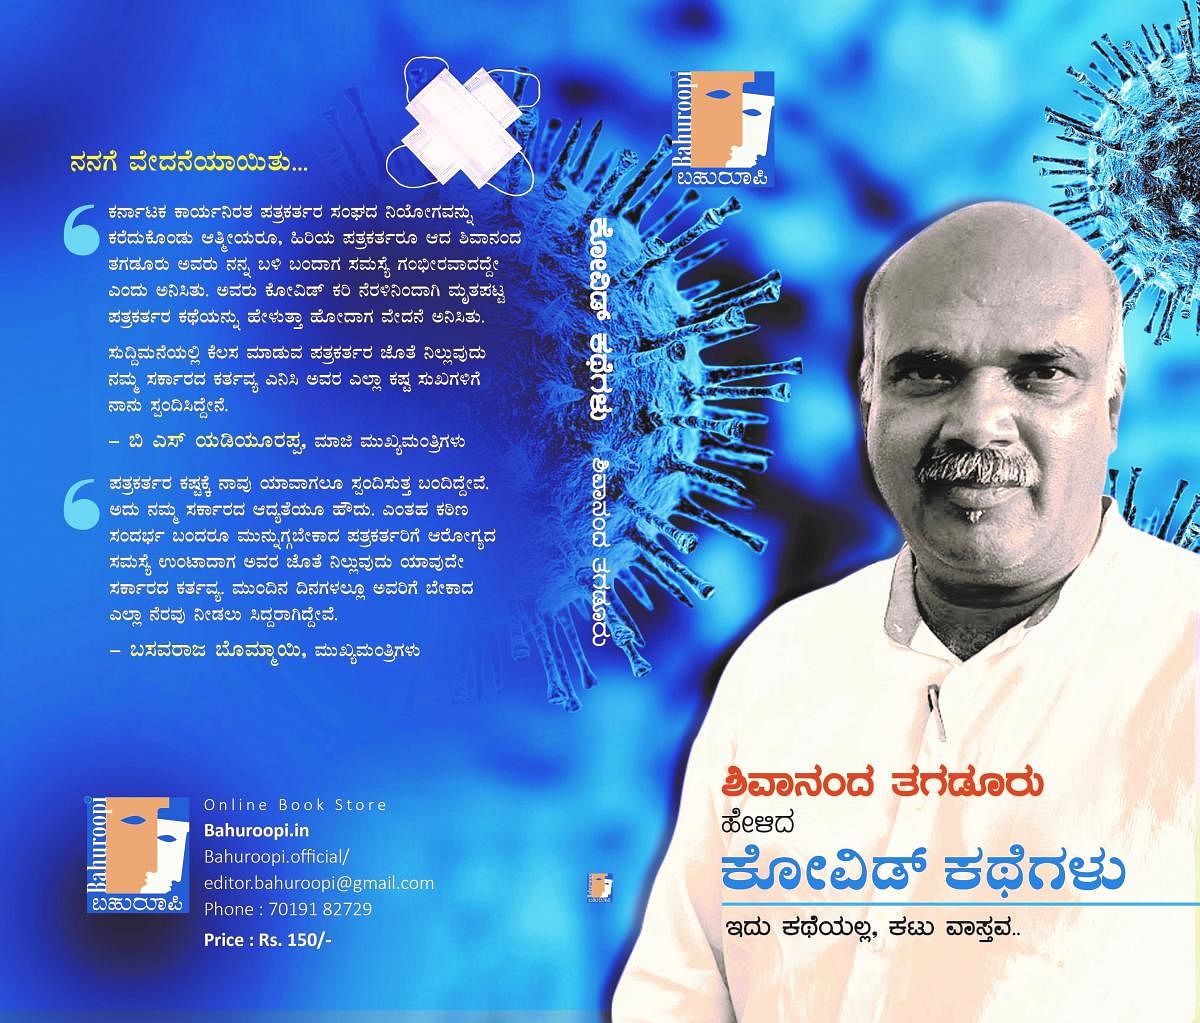 Kannada book on journalists who died during the pandemic